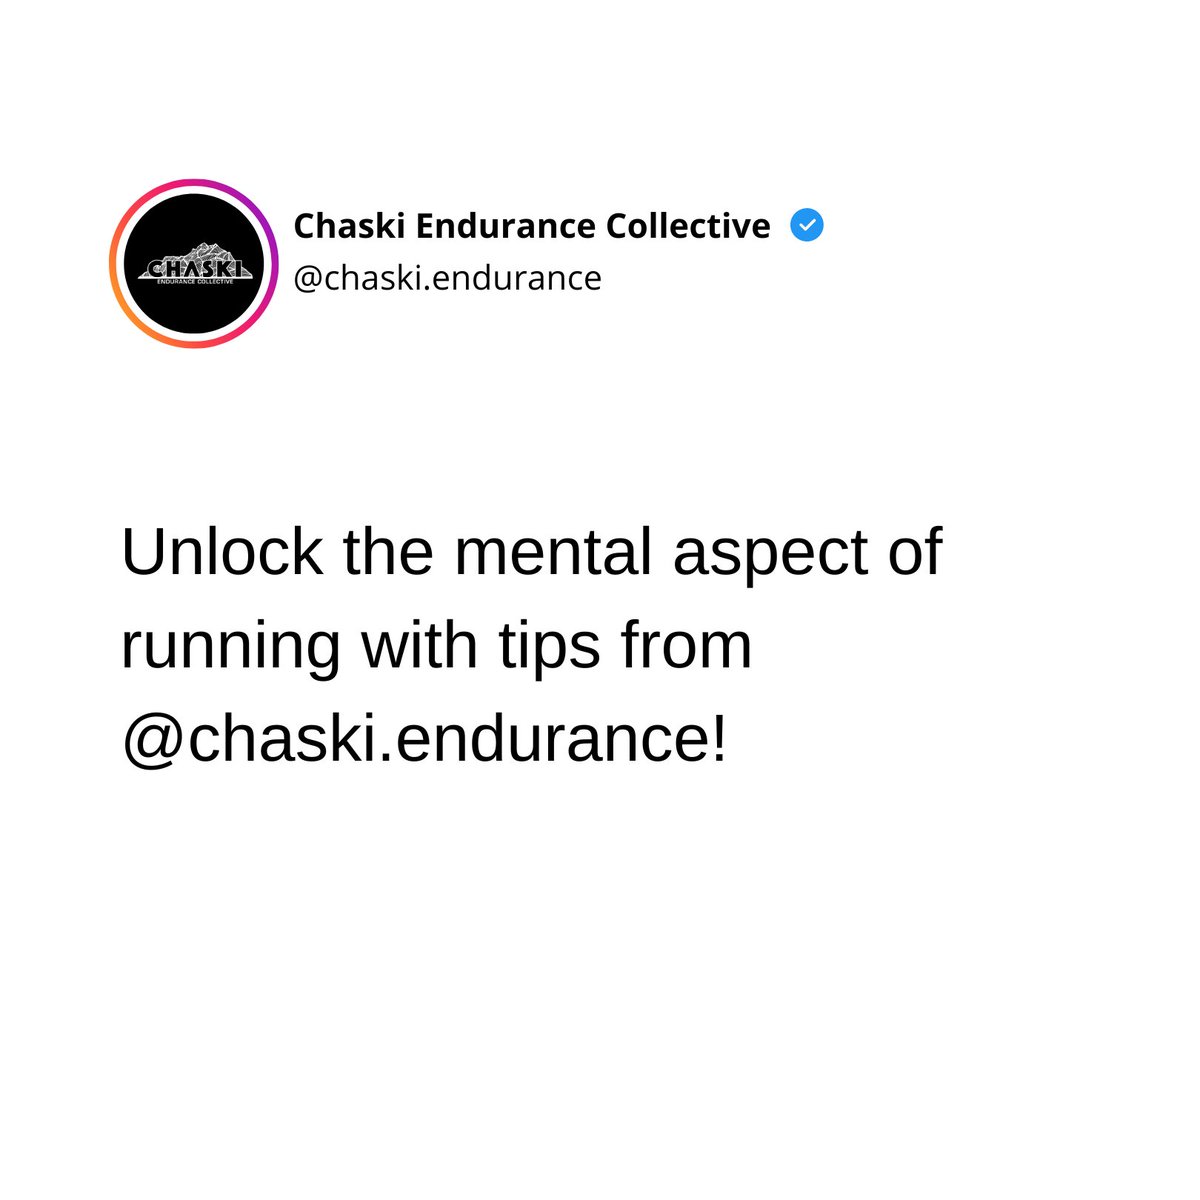 Transform Your Running With This Single Change! 🧘‍♂️ Elevate your runs with mindfulness. Explore how with @chaski.endurance. #MindfulRunning #RunnersMindset #PerformanceBoost